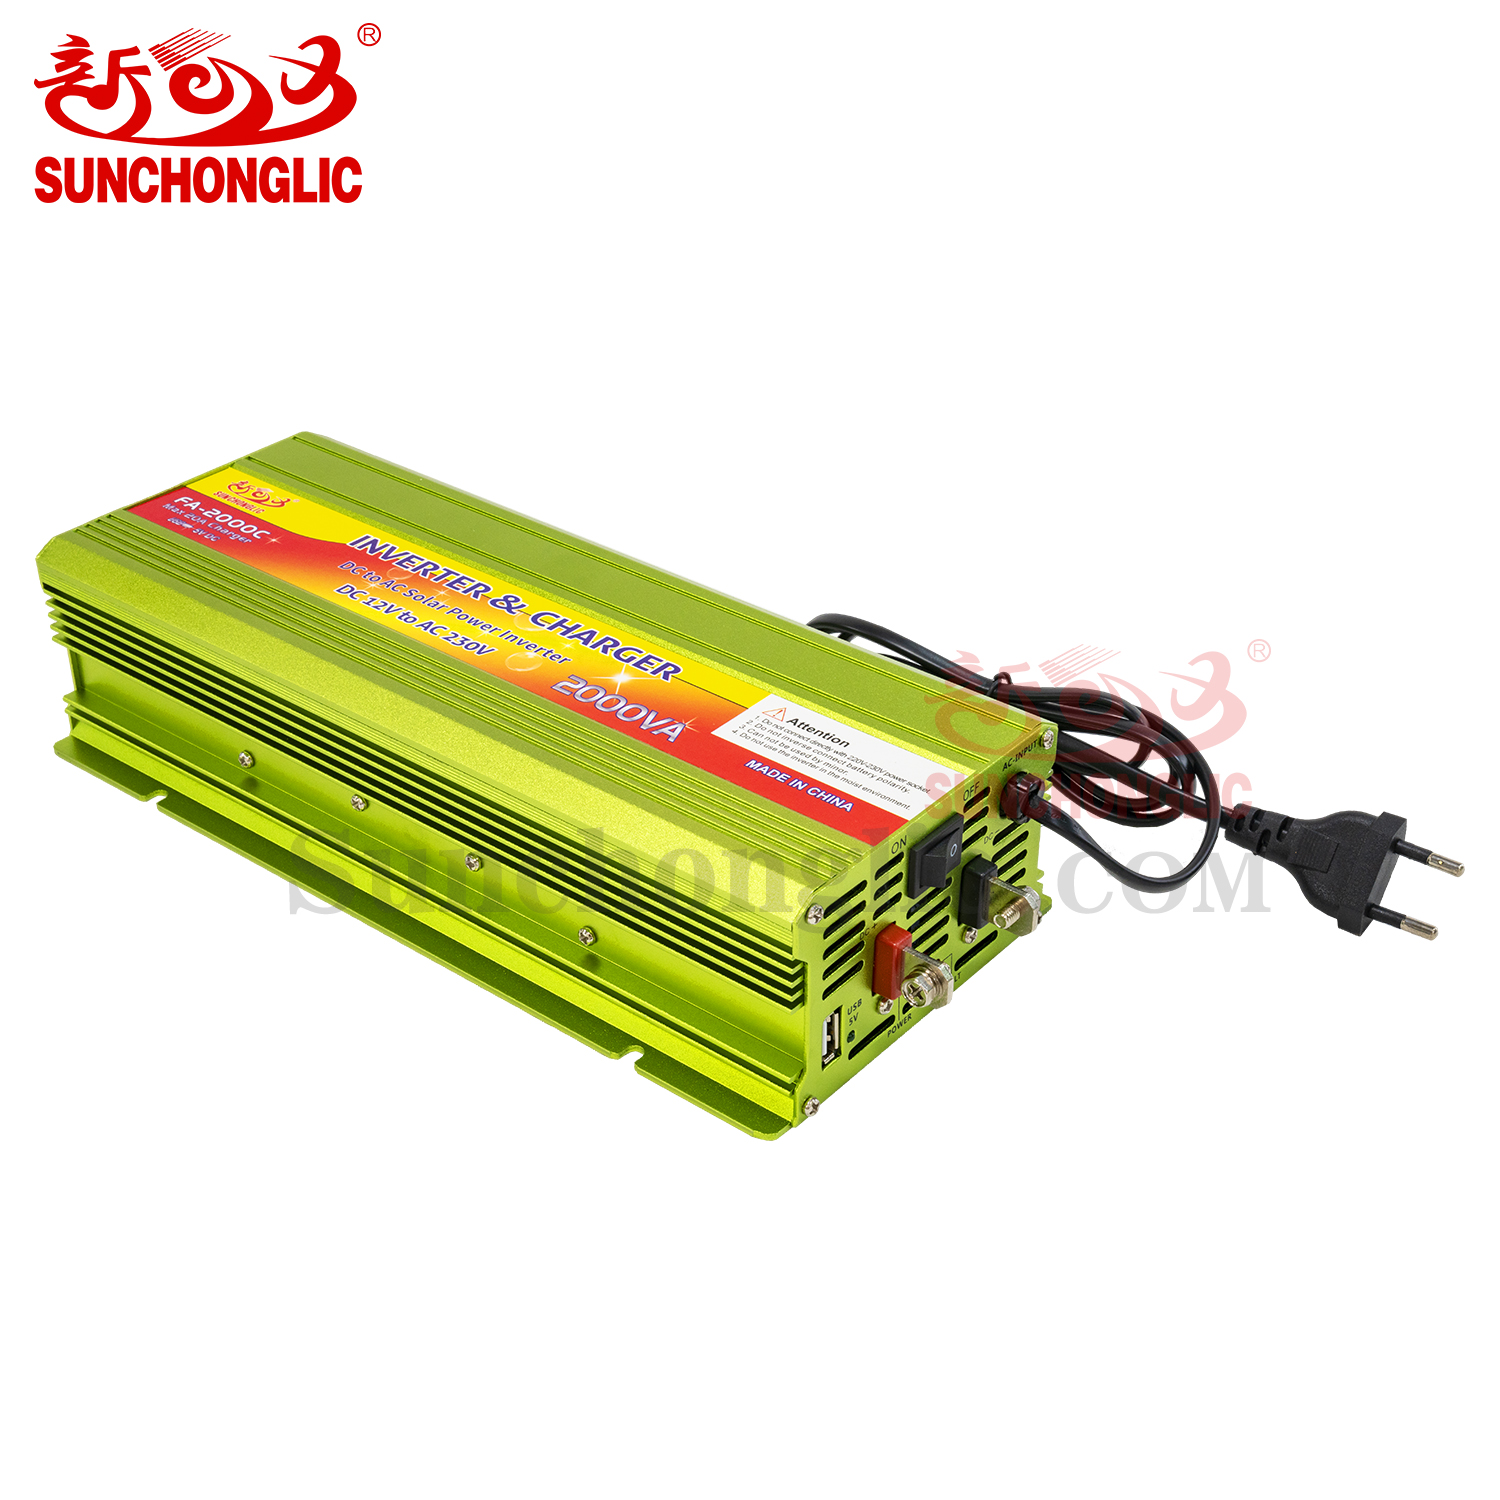 Inverter With Charger - FA-2000C